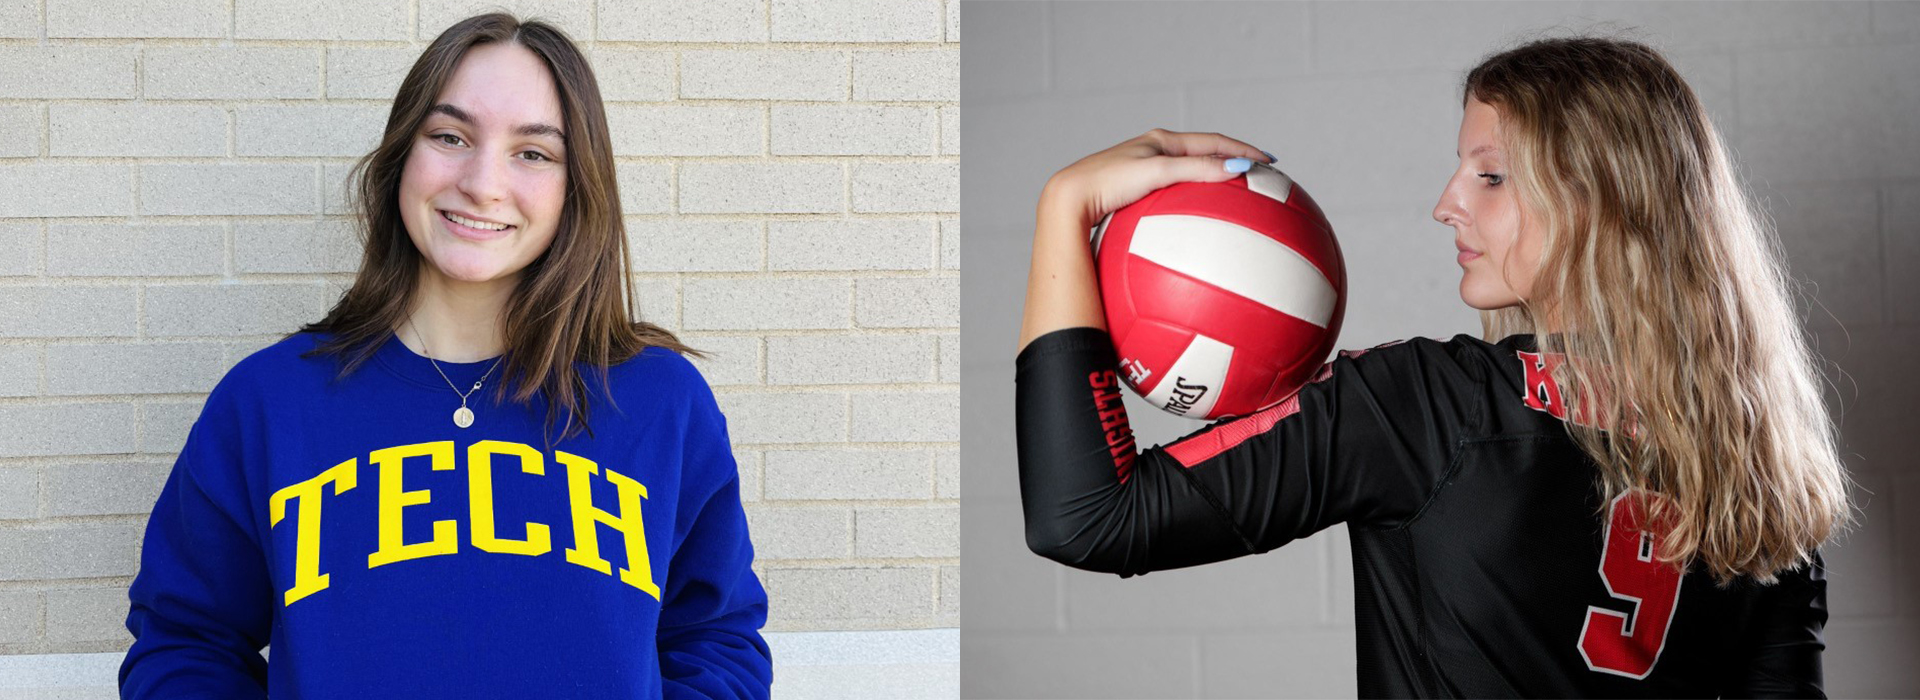 Golden Eagle volleyball team secure Schubert, Shaneyfelt commitments for 2023